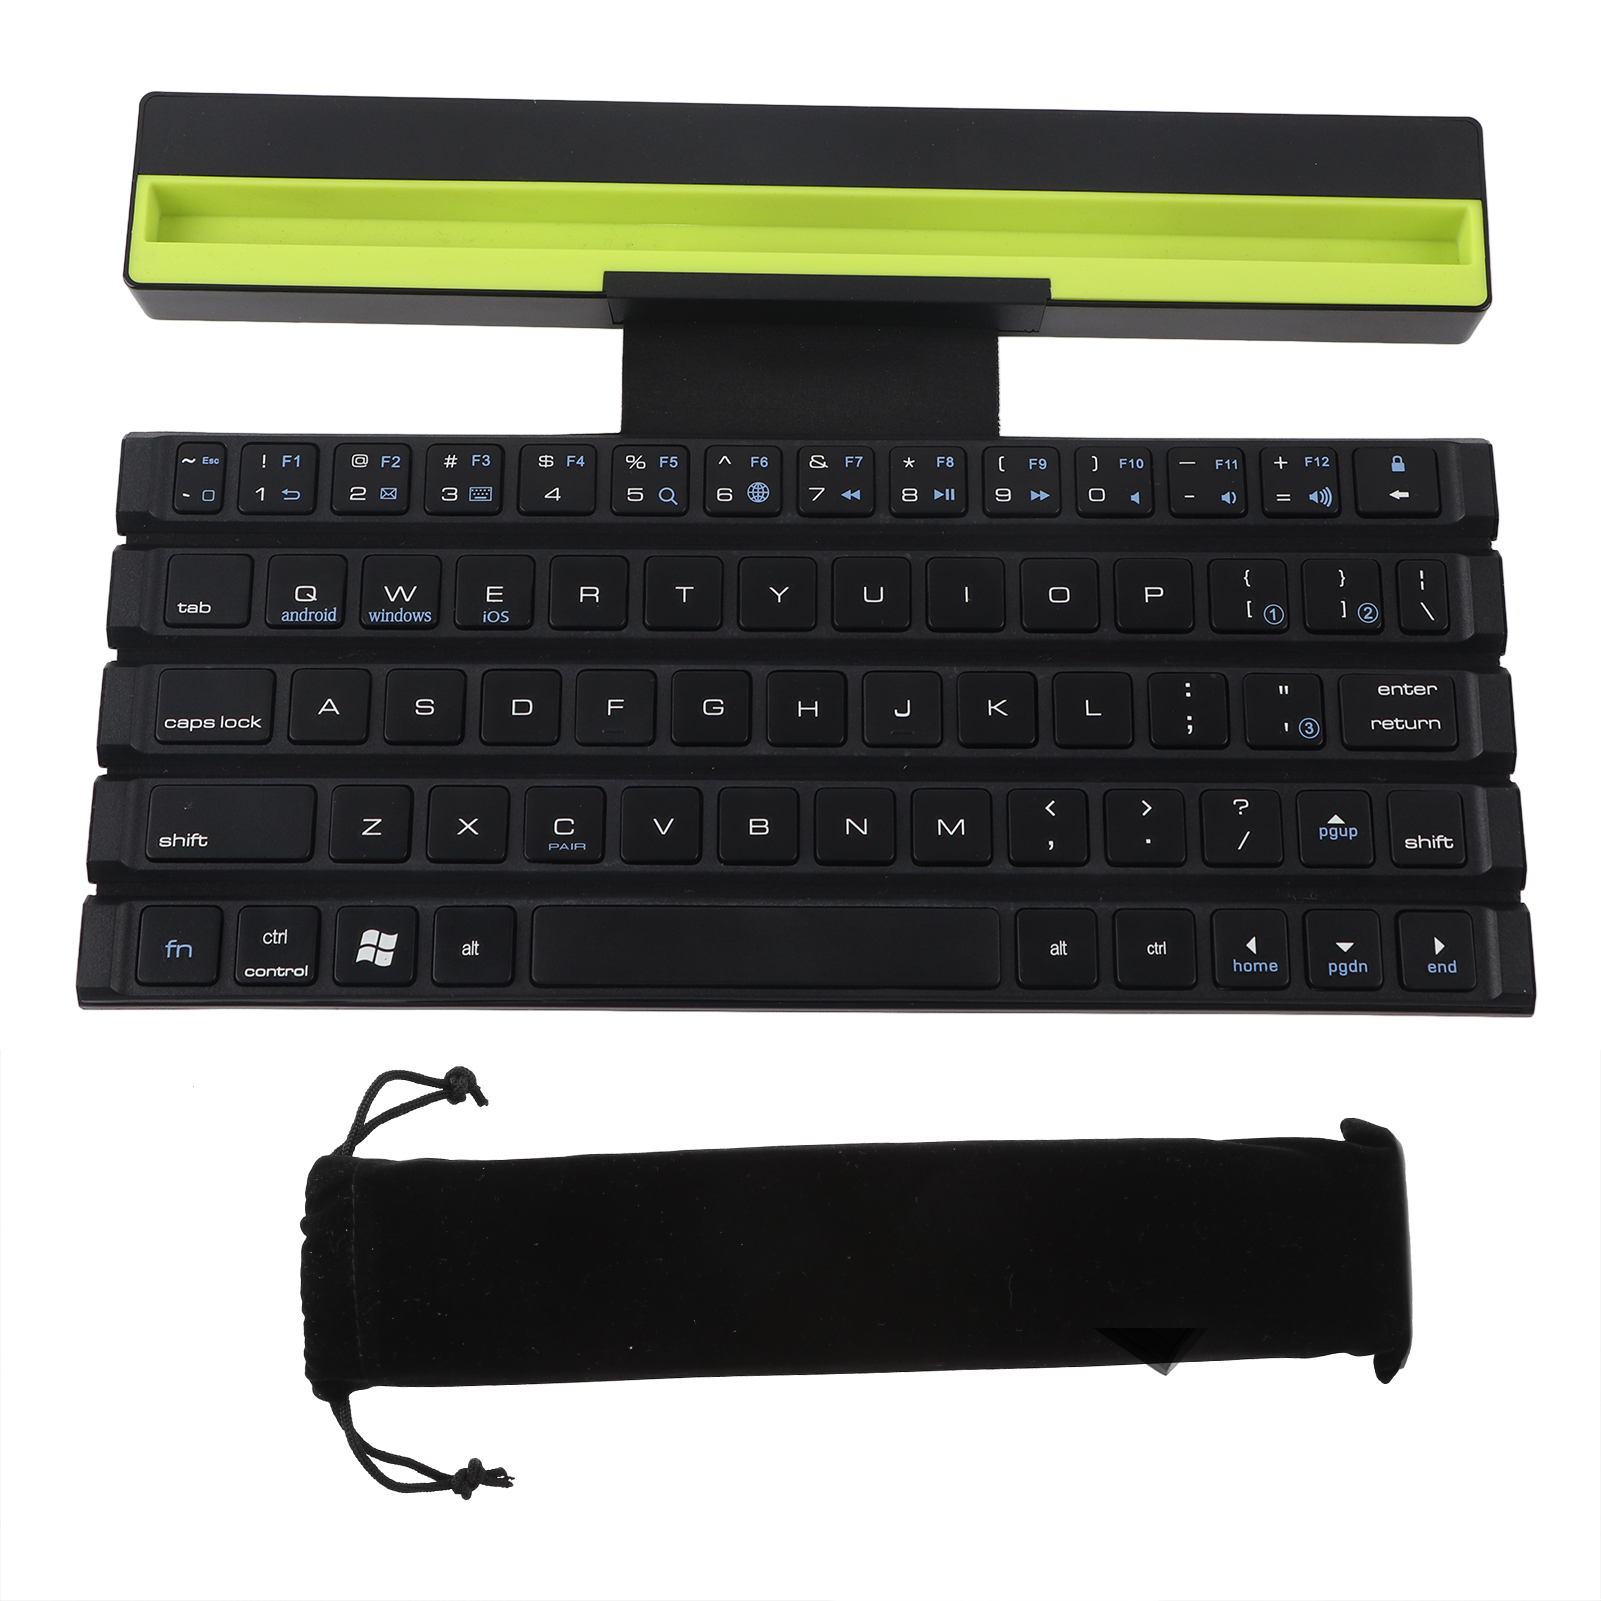 Rollup Keyboard, Wireless Keyboard Portable For PC Tablet For Devices  Multi-connection